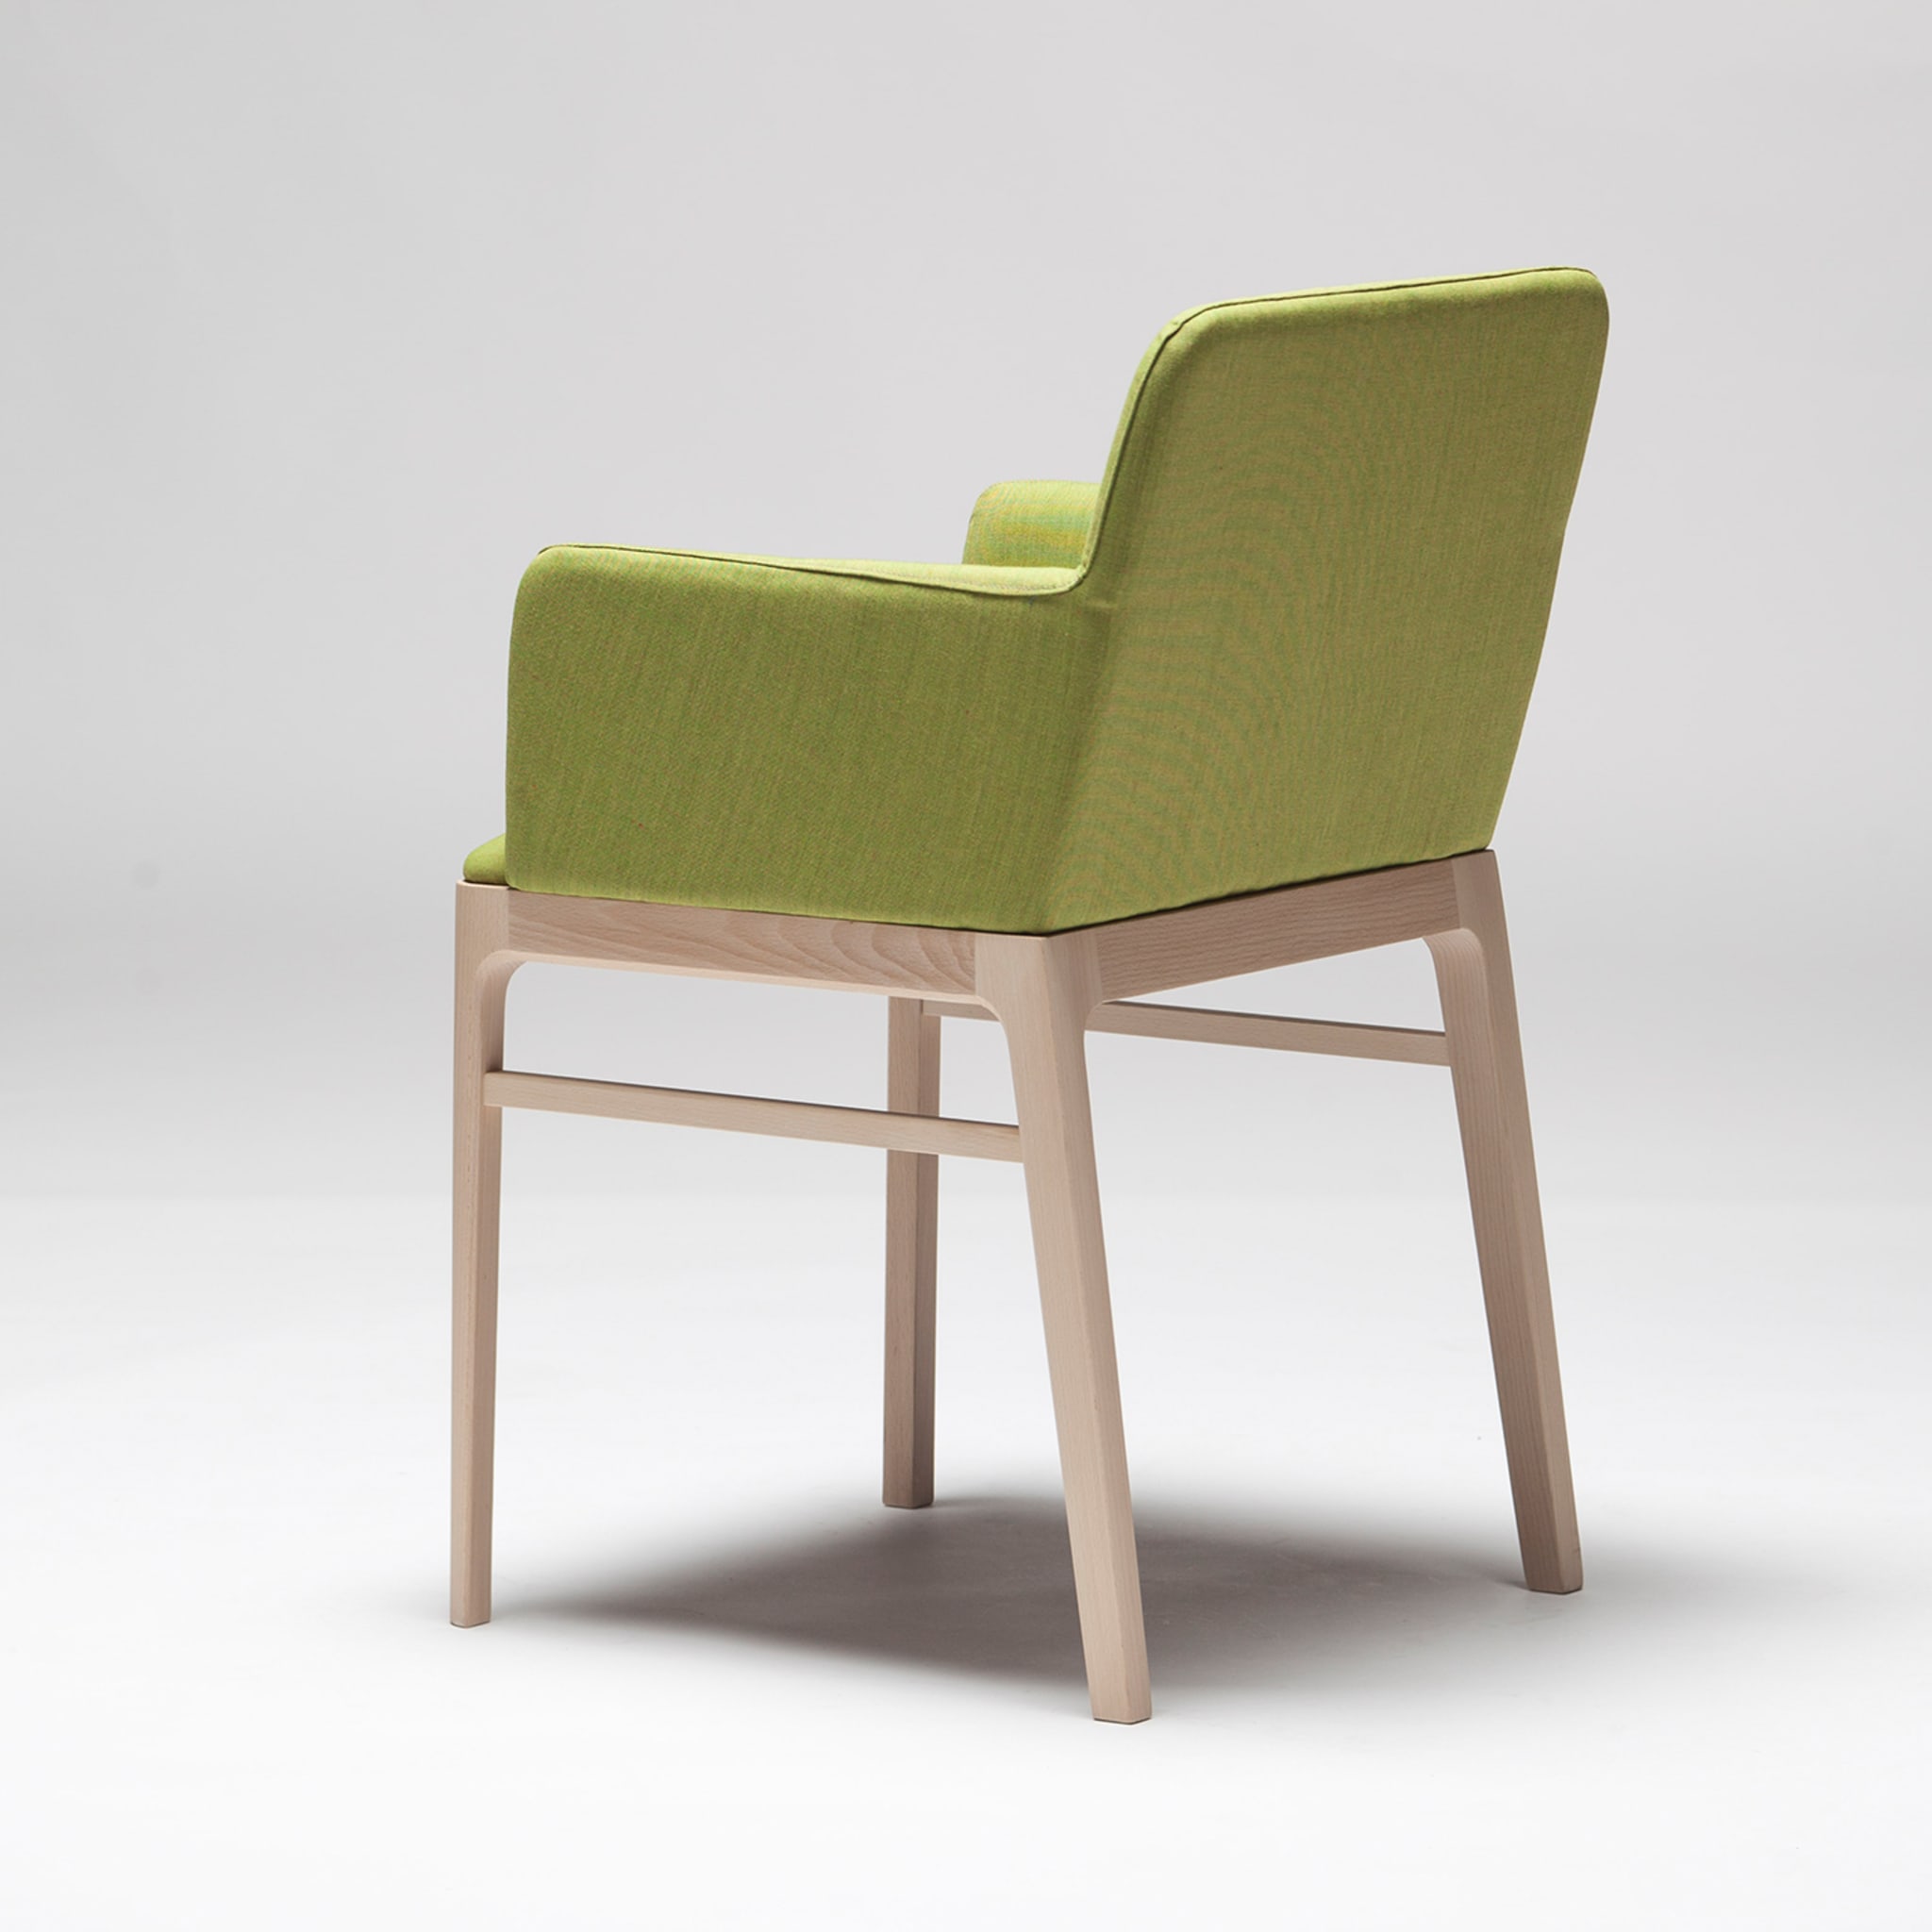 Tip Tap 381 Green Armchair by Claudio Perin - Alternative view 1